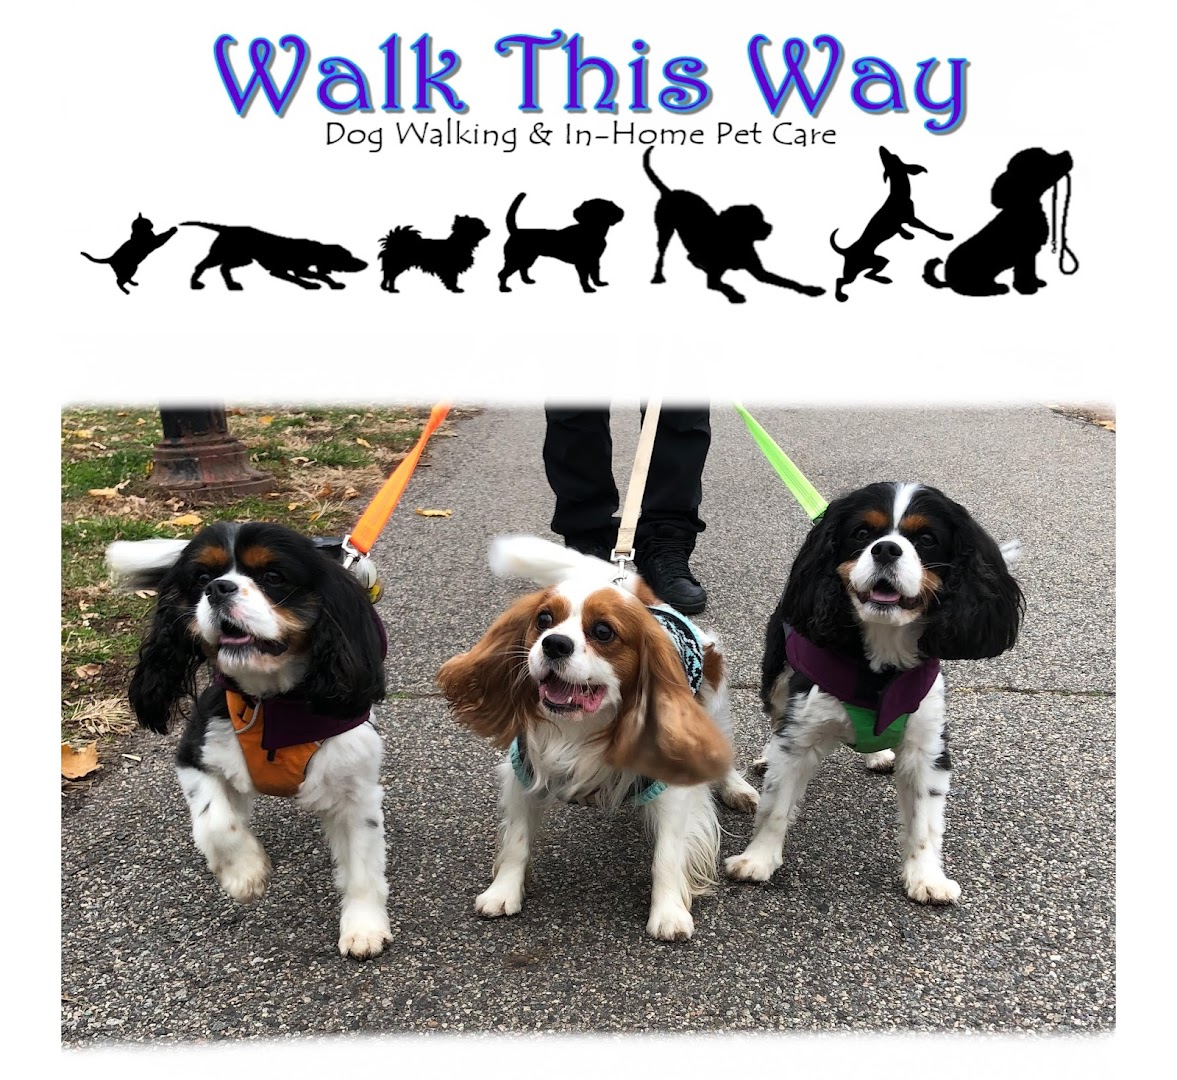 Walk This Way Dog Walking & In-Home Pet Care